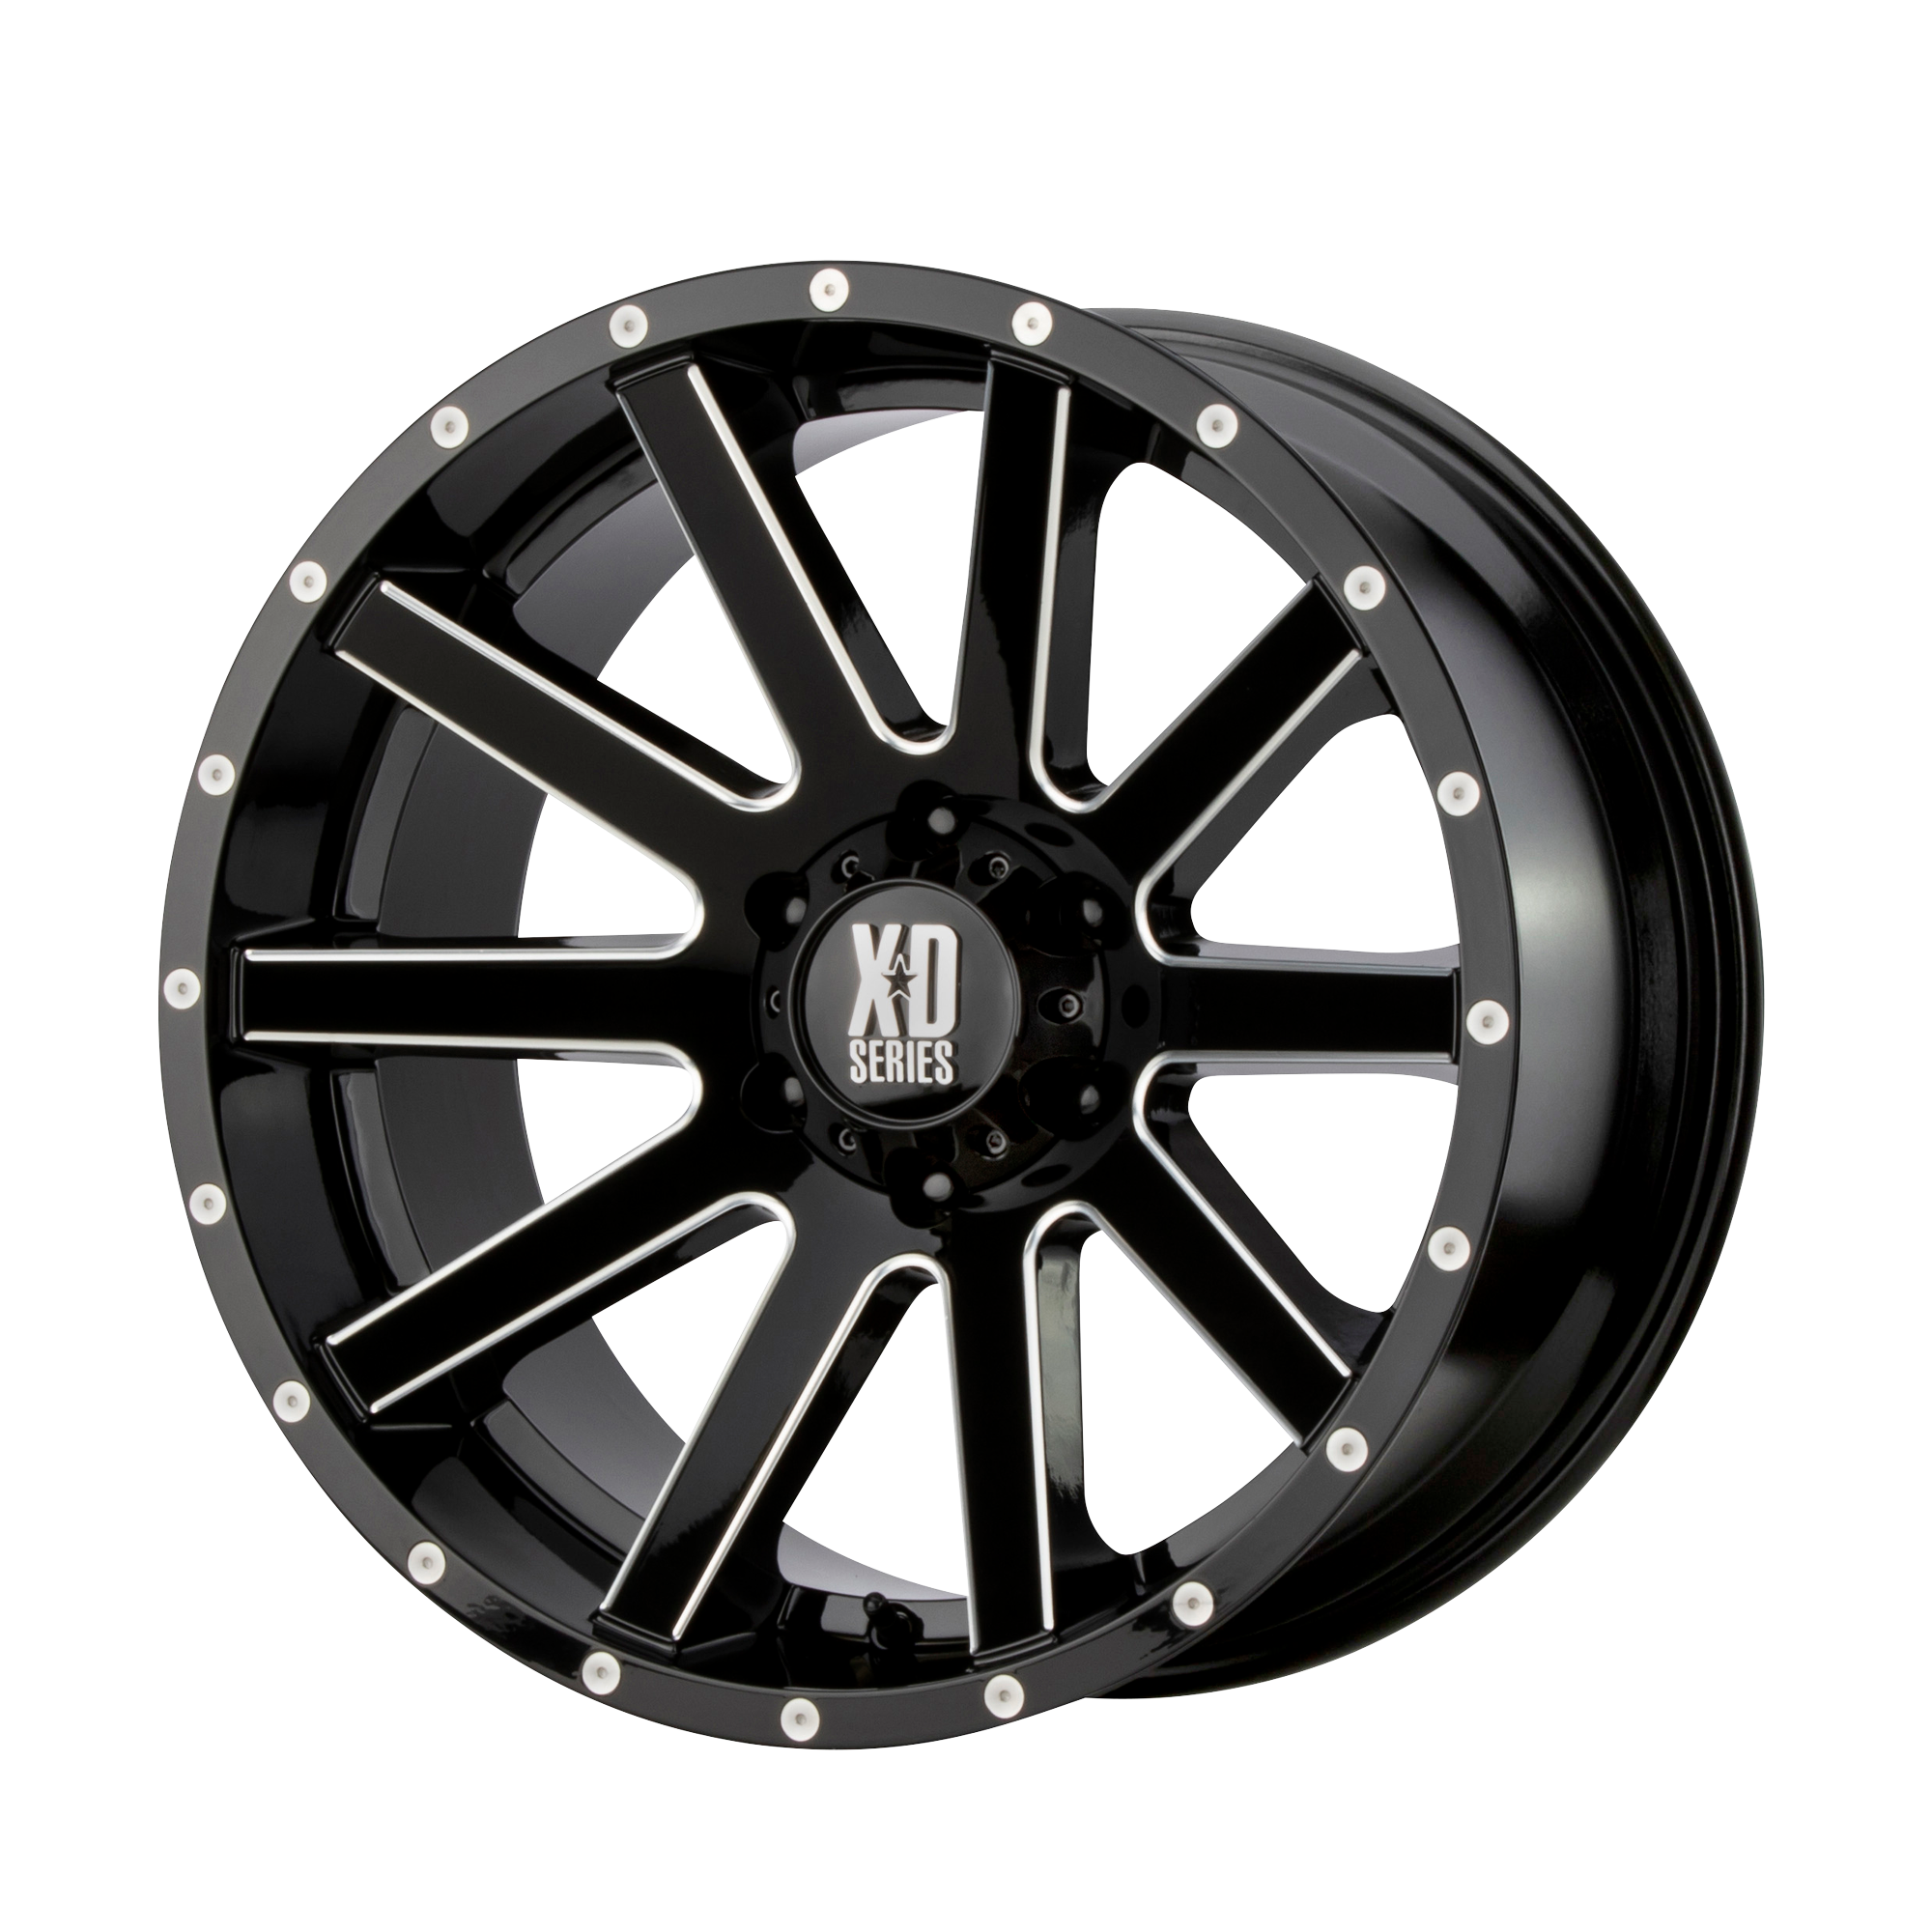 HEIST 20x9 6x135.00 GLOSS BLACK MILLED (30 mm) - Tires and Engine Performance